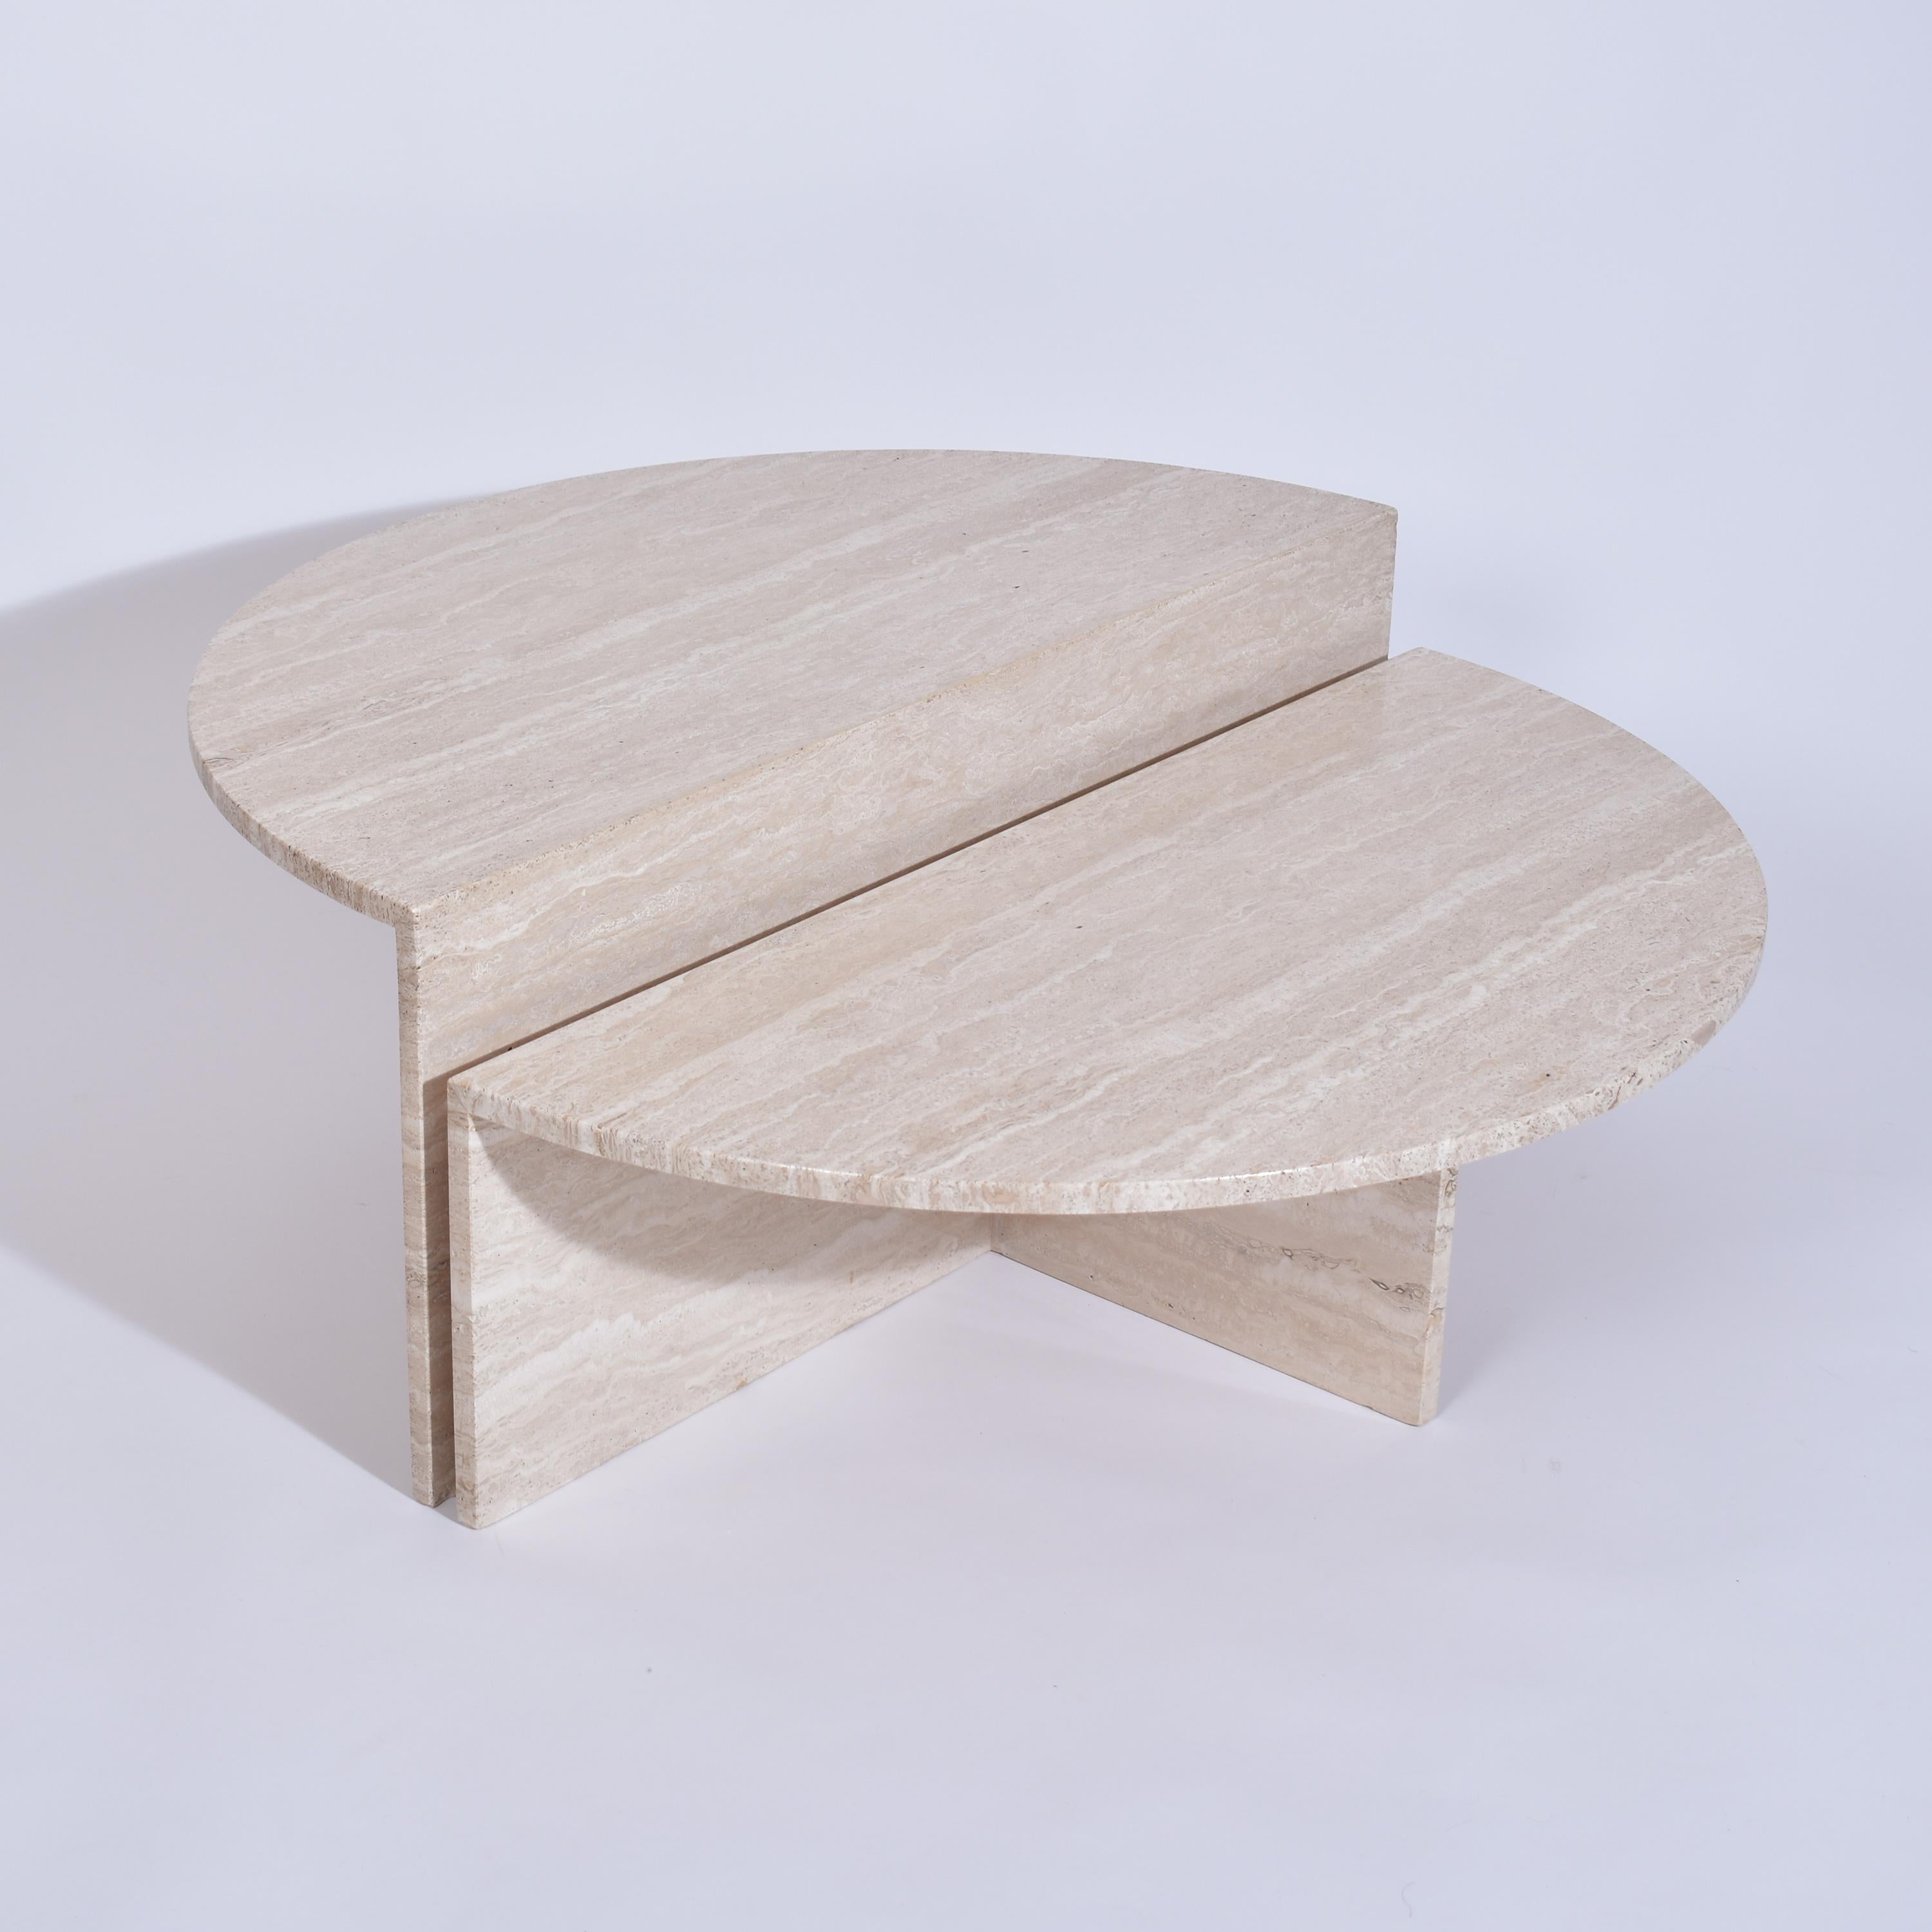 Set of two cream travertine coffee tables.
The half round tables have a different height ( 30 cm / 11.8'' ) ( 40 cm / 15.7''. )
They can be used together or separately, giving a strong architectural and classical touch.
Travertine offers pleasing